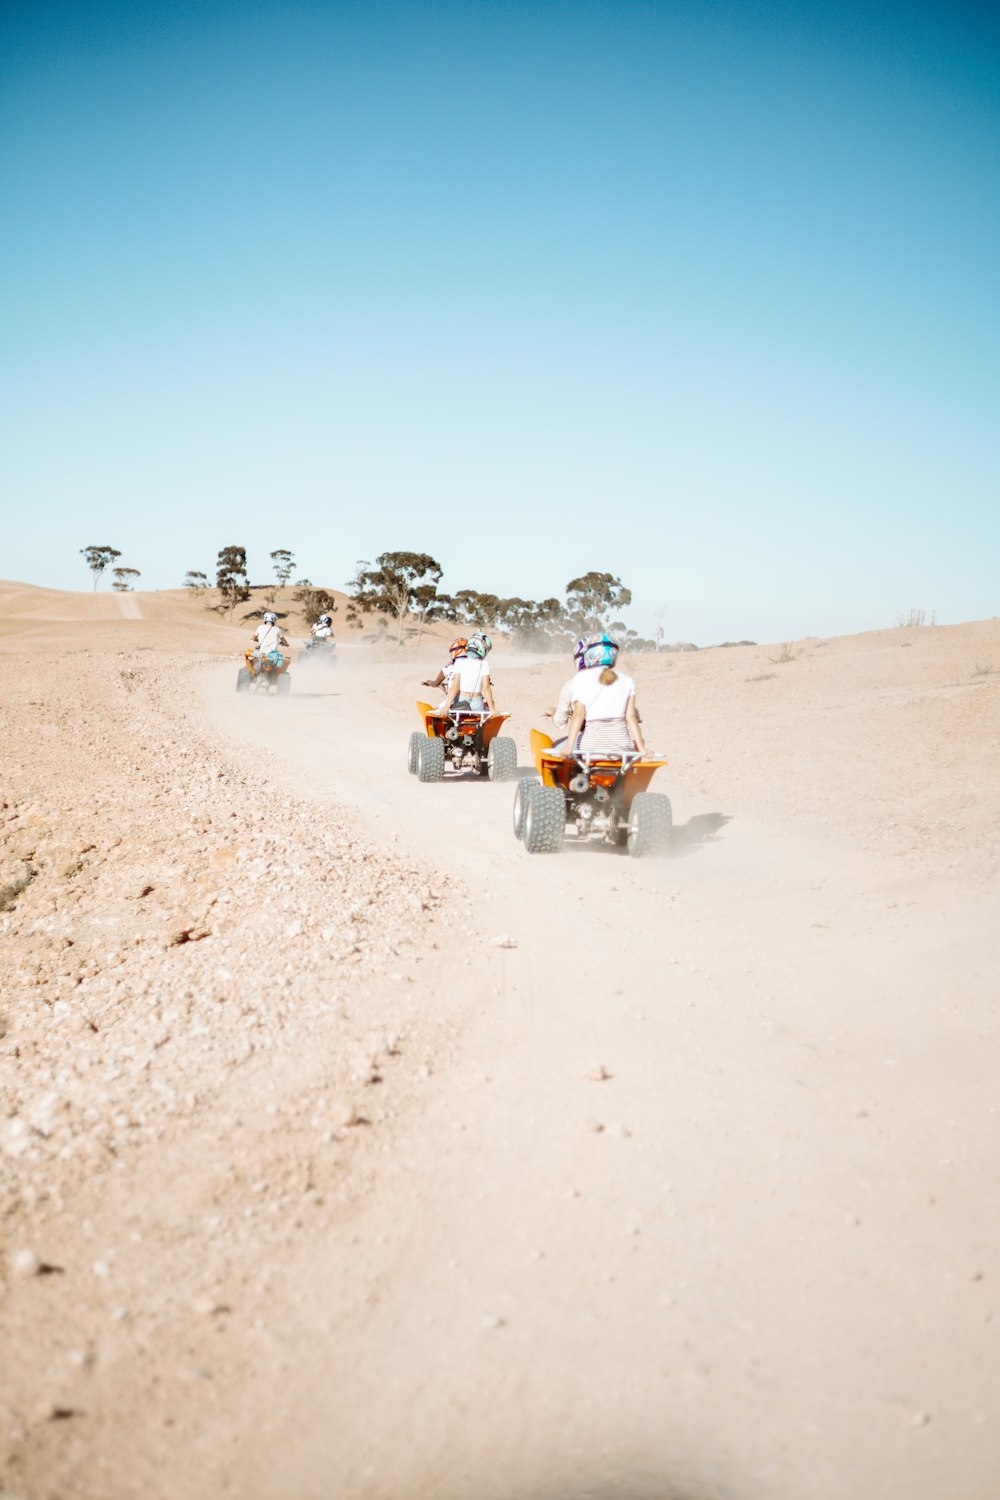 people riding motorcycle on brown sand during daytime